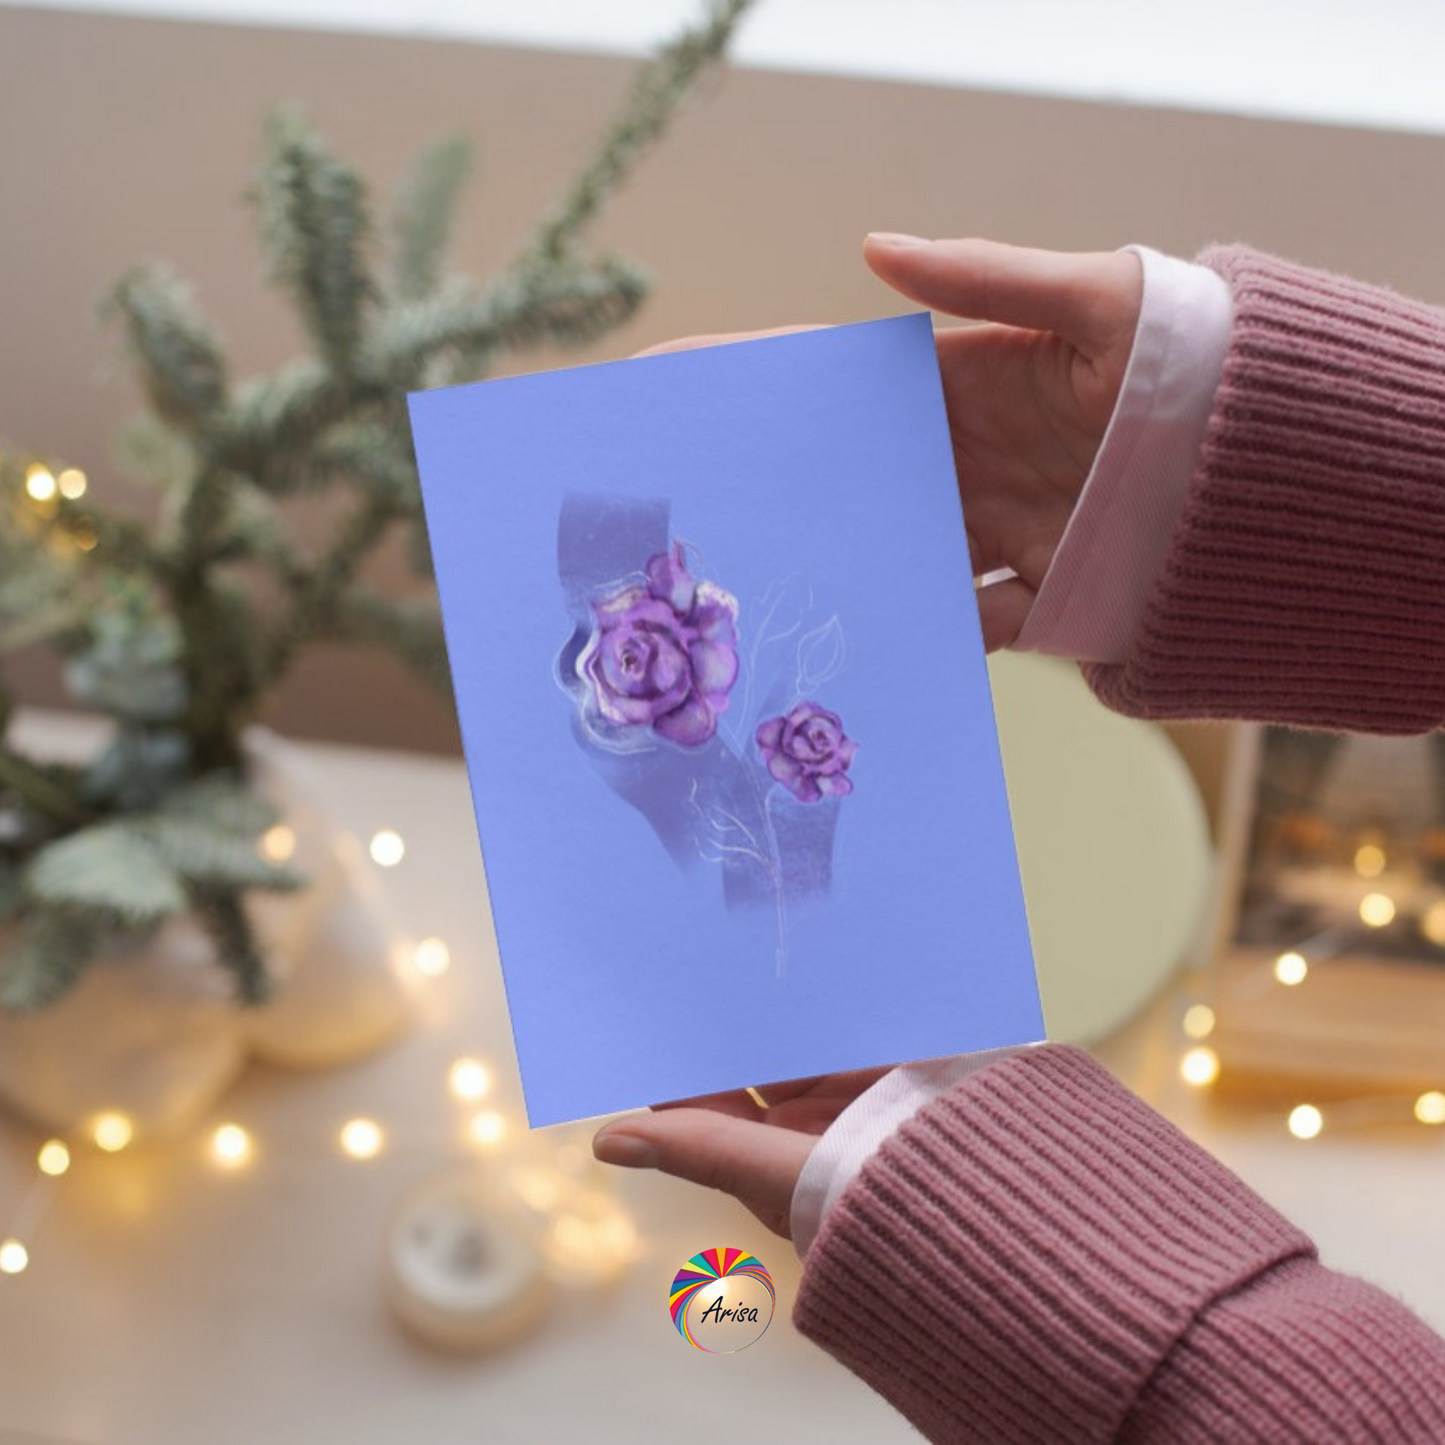 "ROSE" Greeting Card by ArisaTeam in the hands of a woman ideal as a Christmas card.